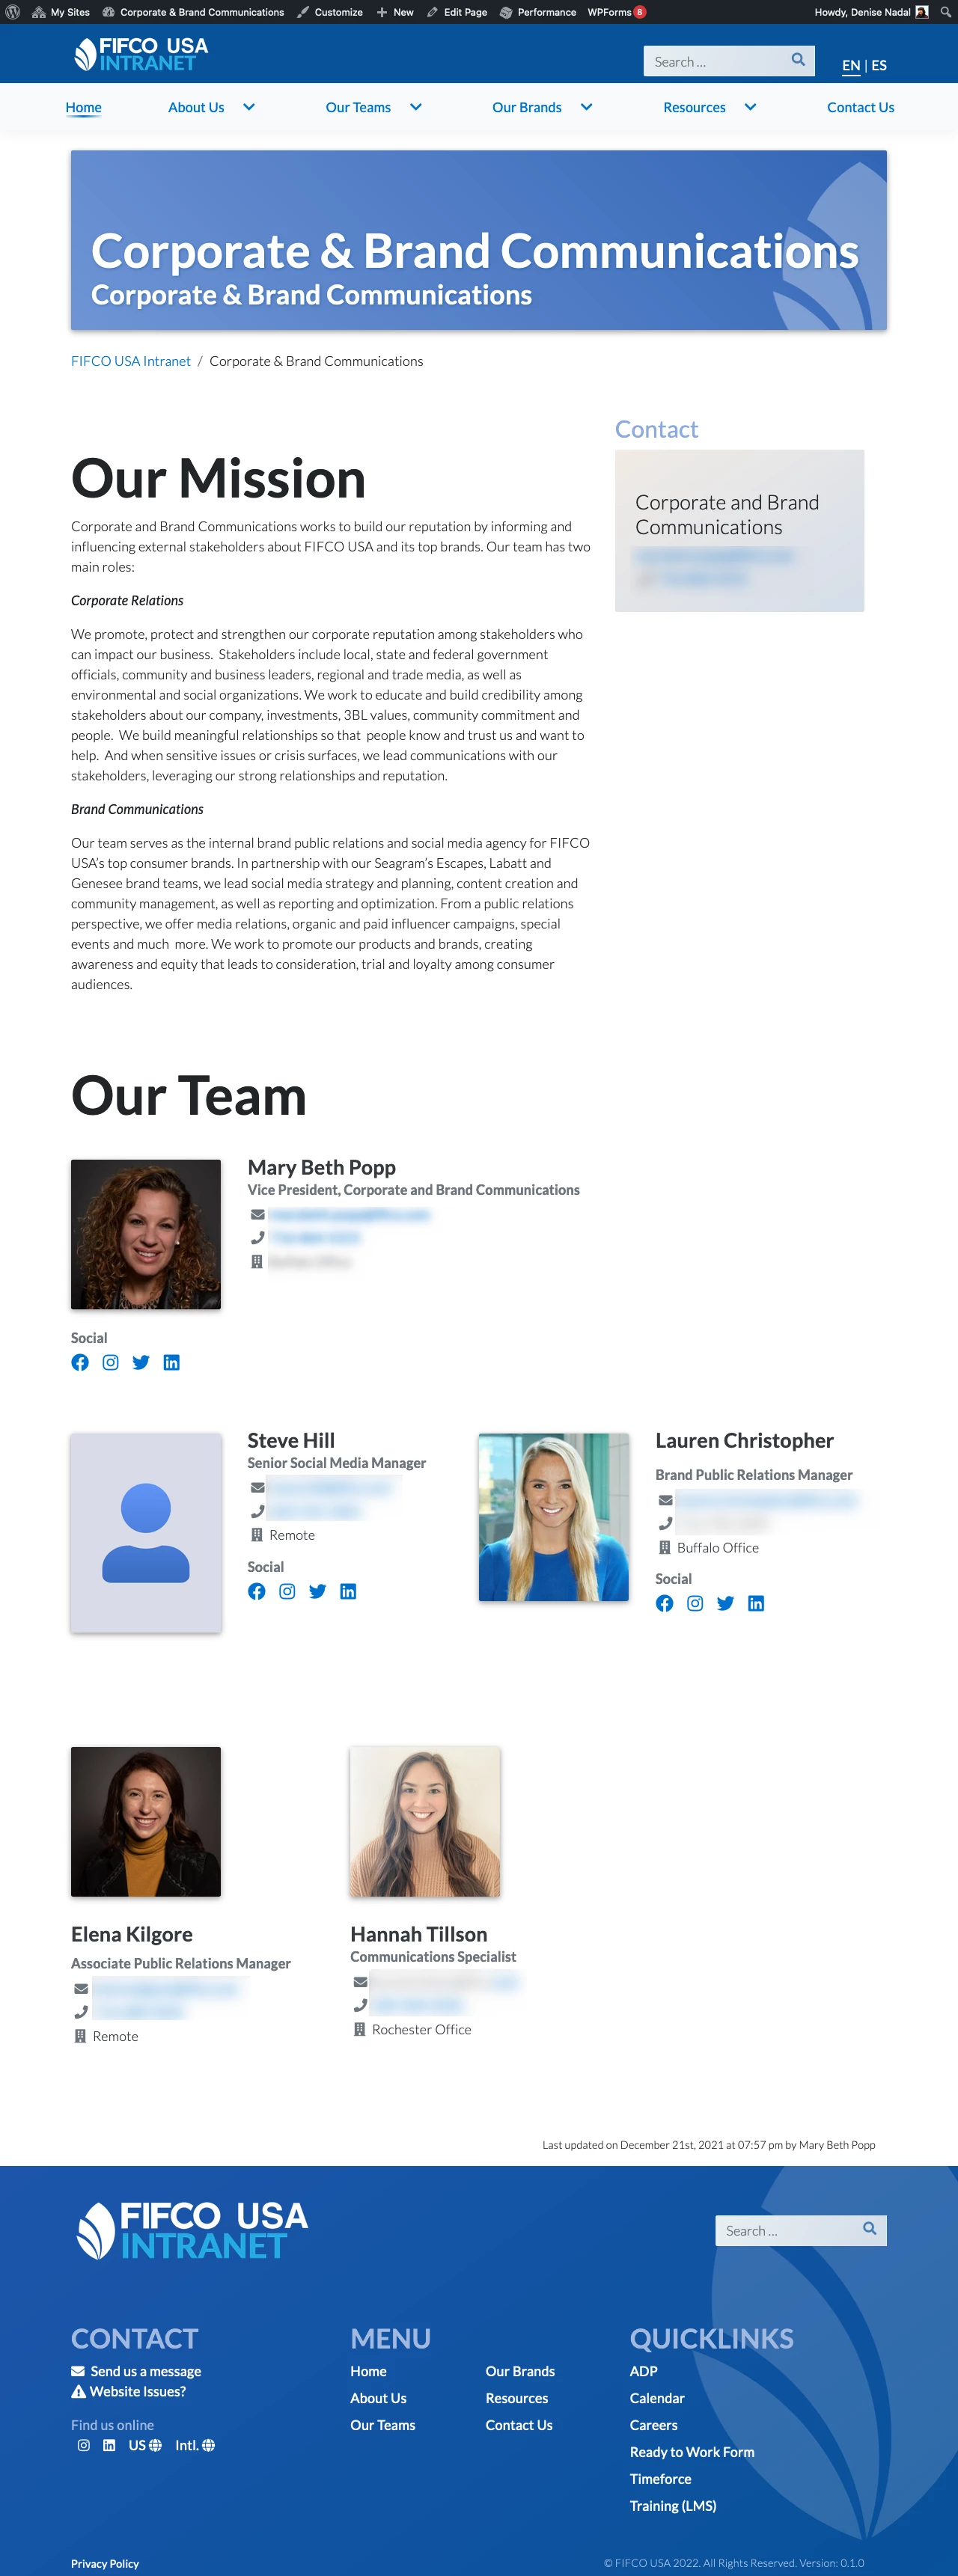 Example Team page - Desktop size